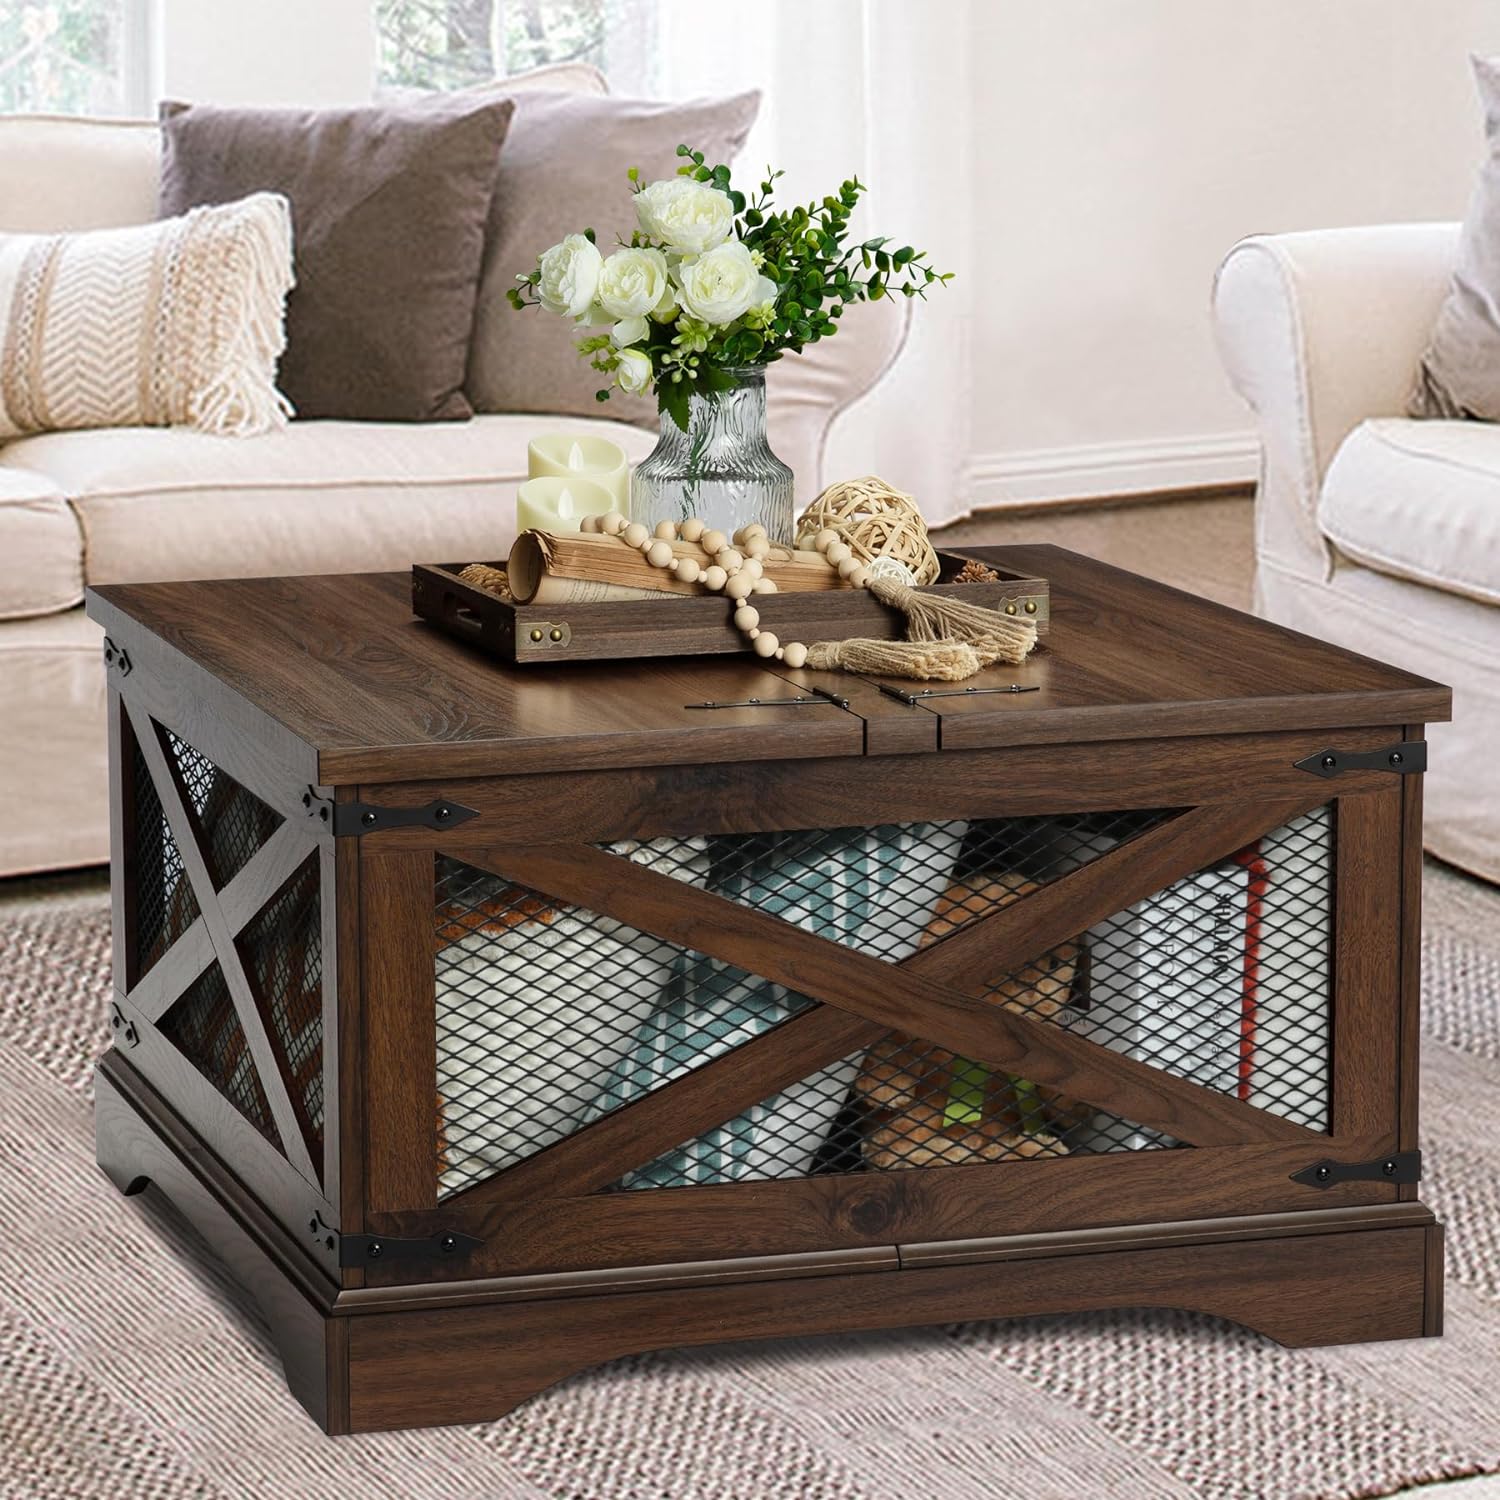 HOKYHOKY Square Coffee Table with Storage